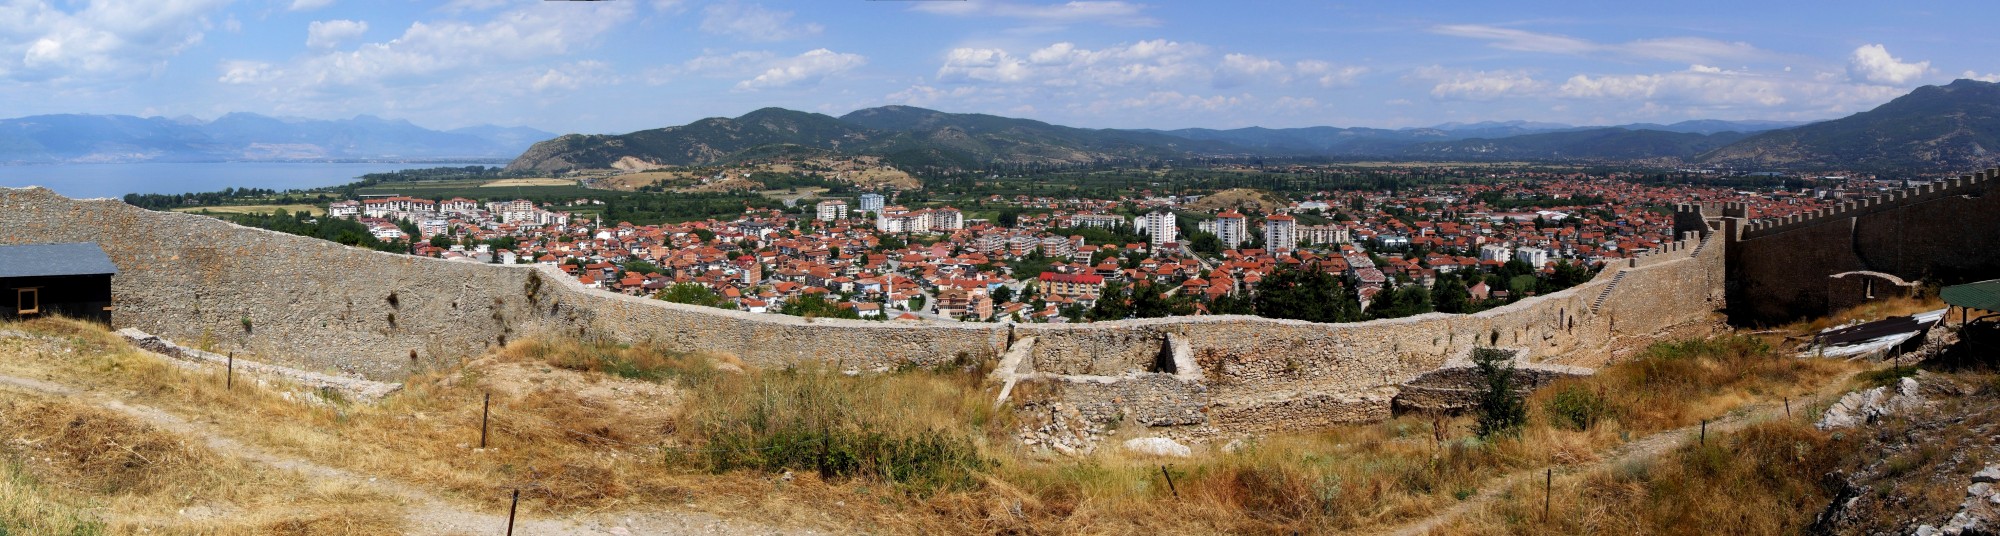 Ohrid city - view from Samuil's Fortress